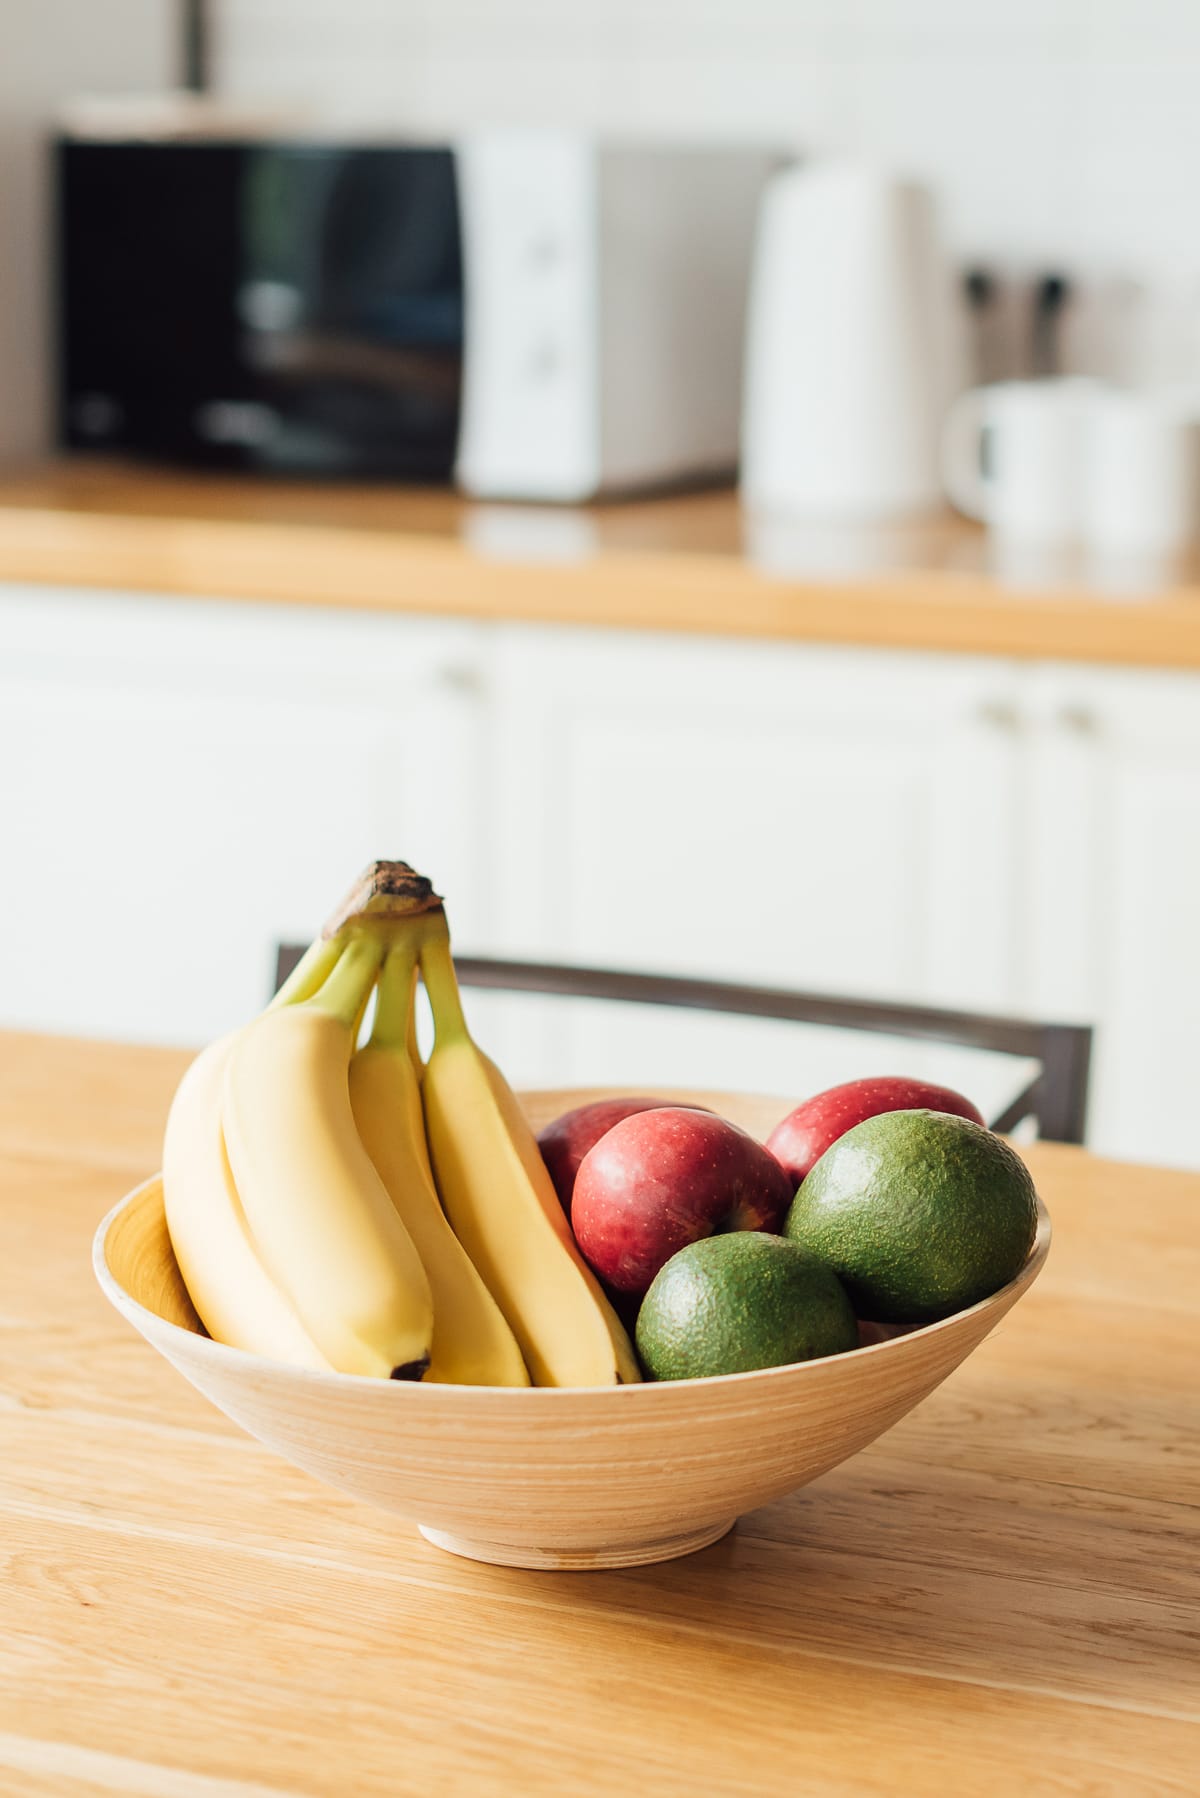 wooden basket with bananas, apples, and avocado on a countertop showing how to store avocado and other fruits to ripen the avocado.